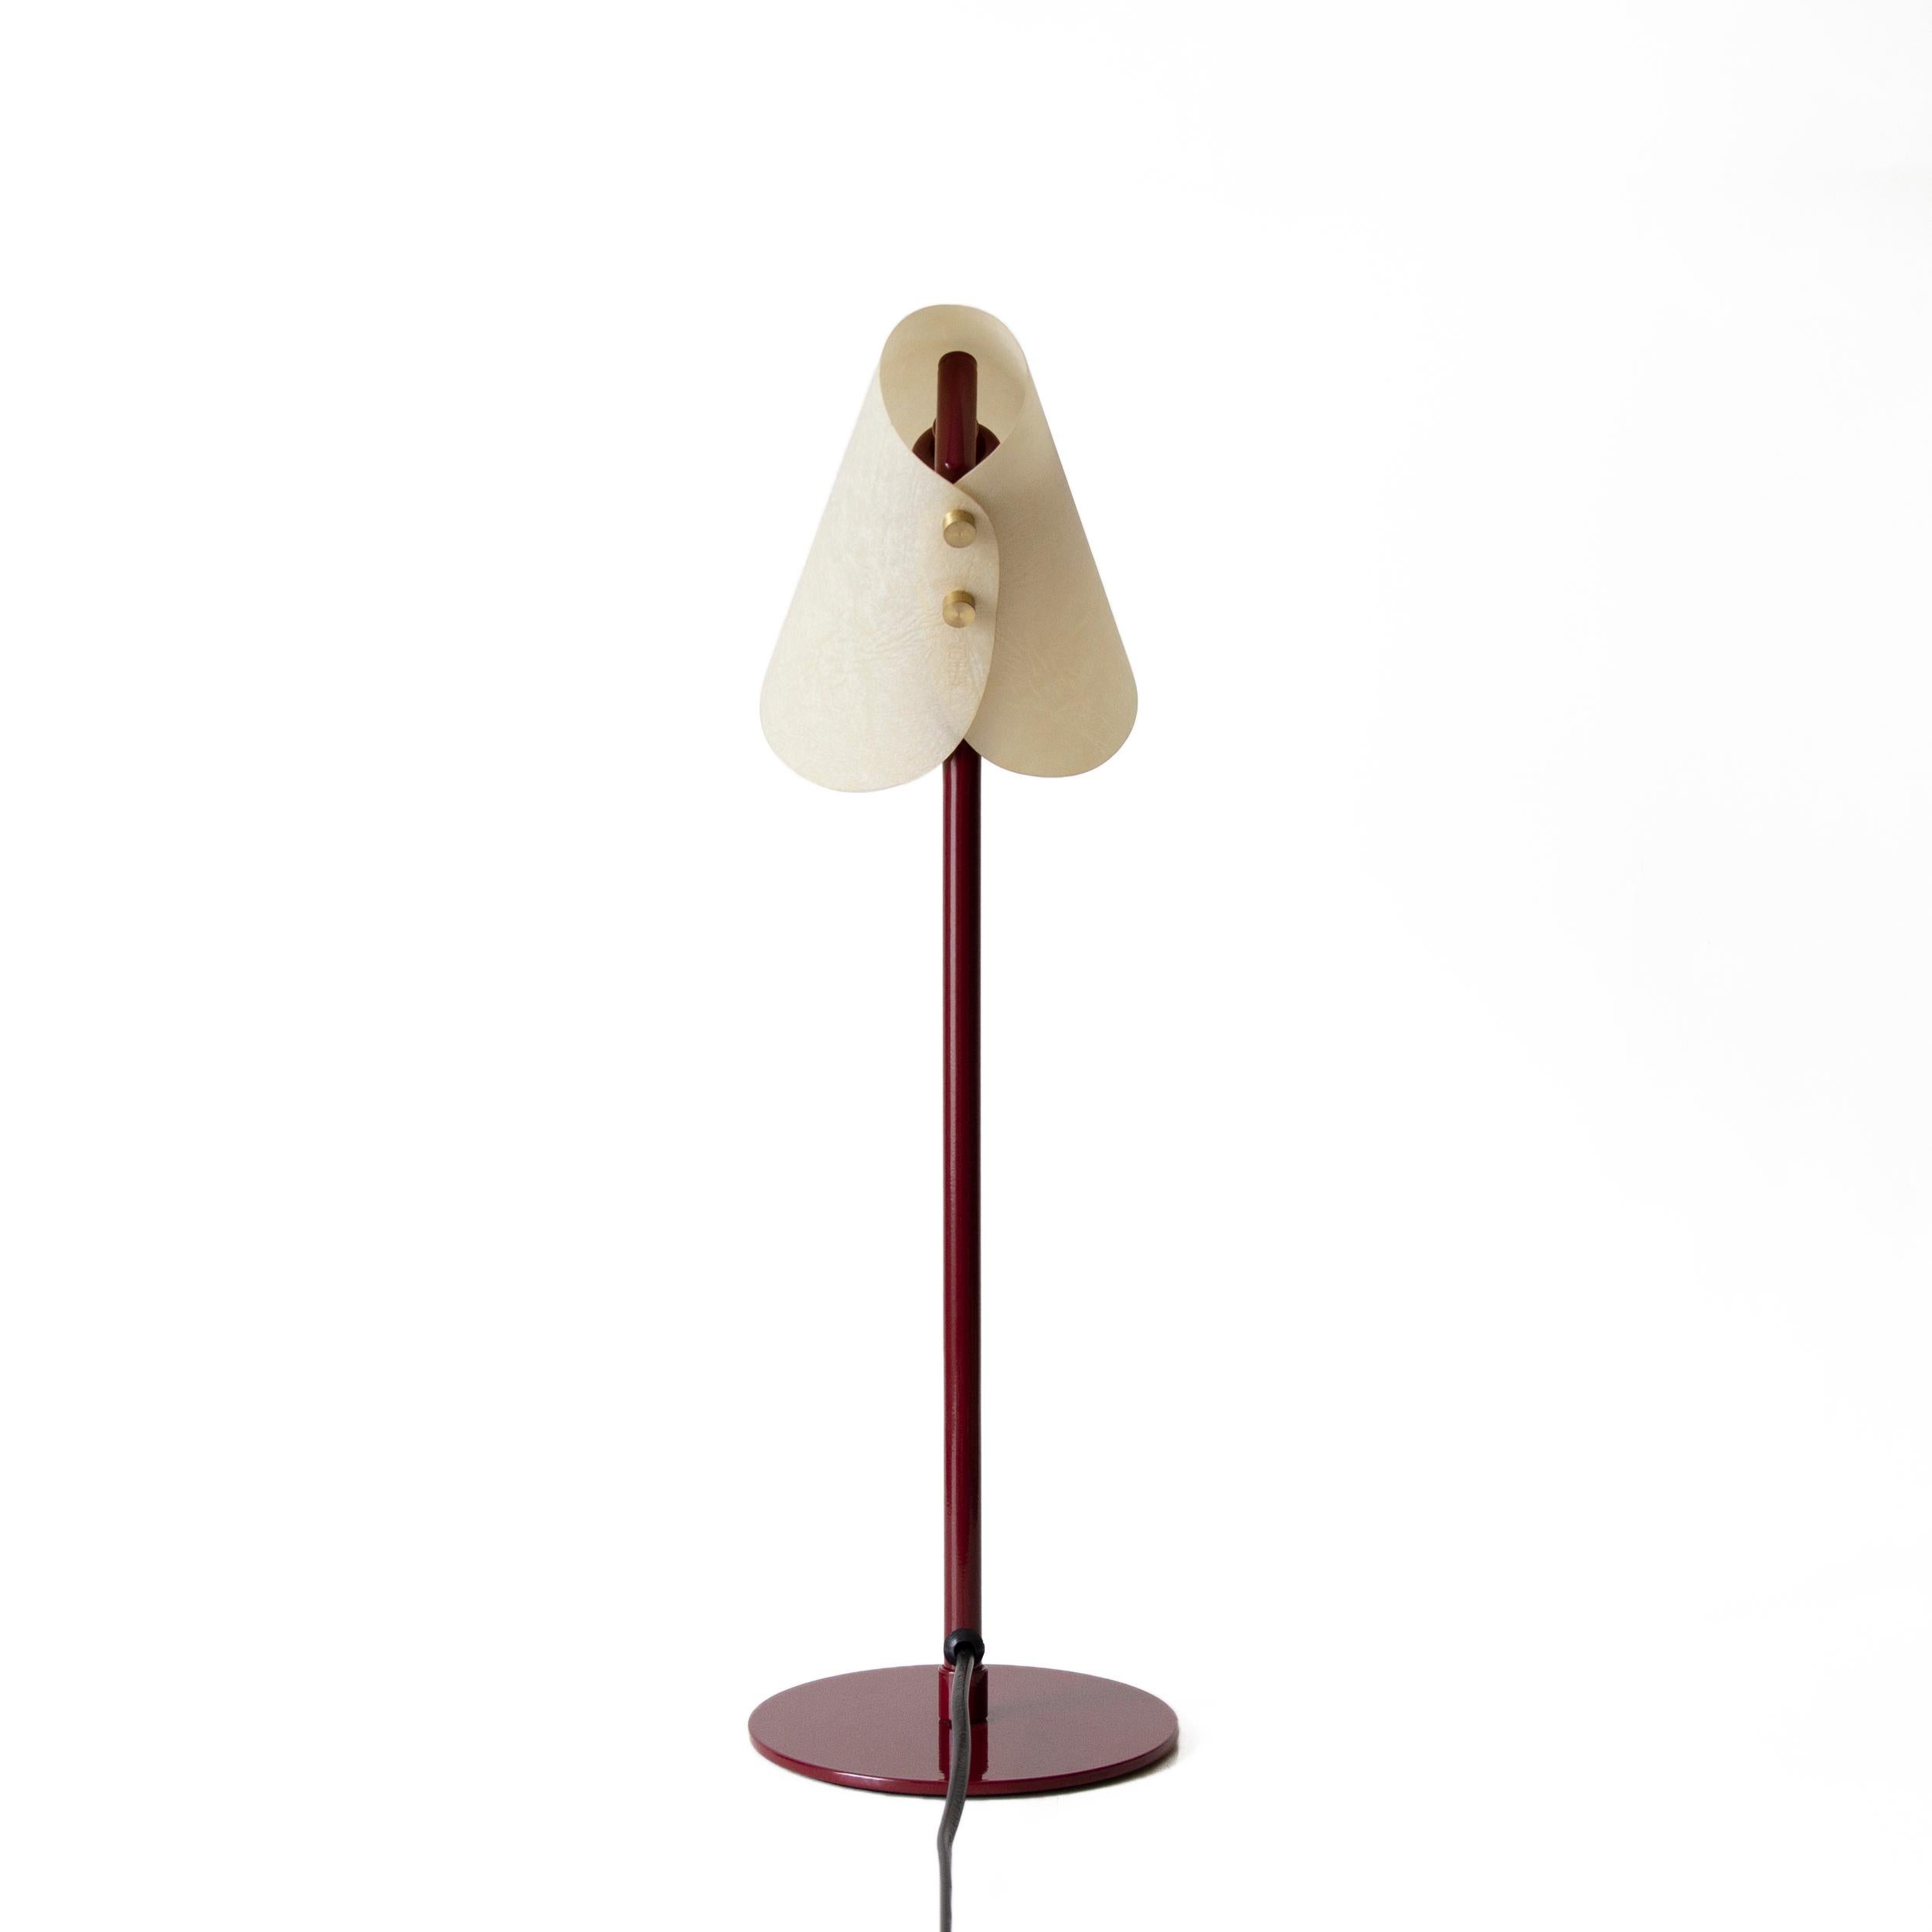 Turkish Metal & Parchment Desk Lamp, Maroon, June, Inspired by Handmaid's Tale For Sale